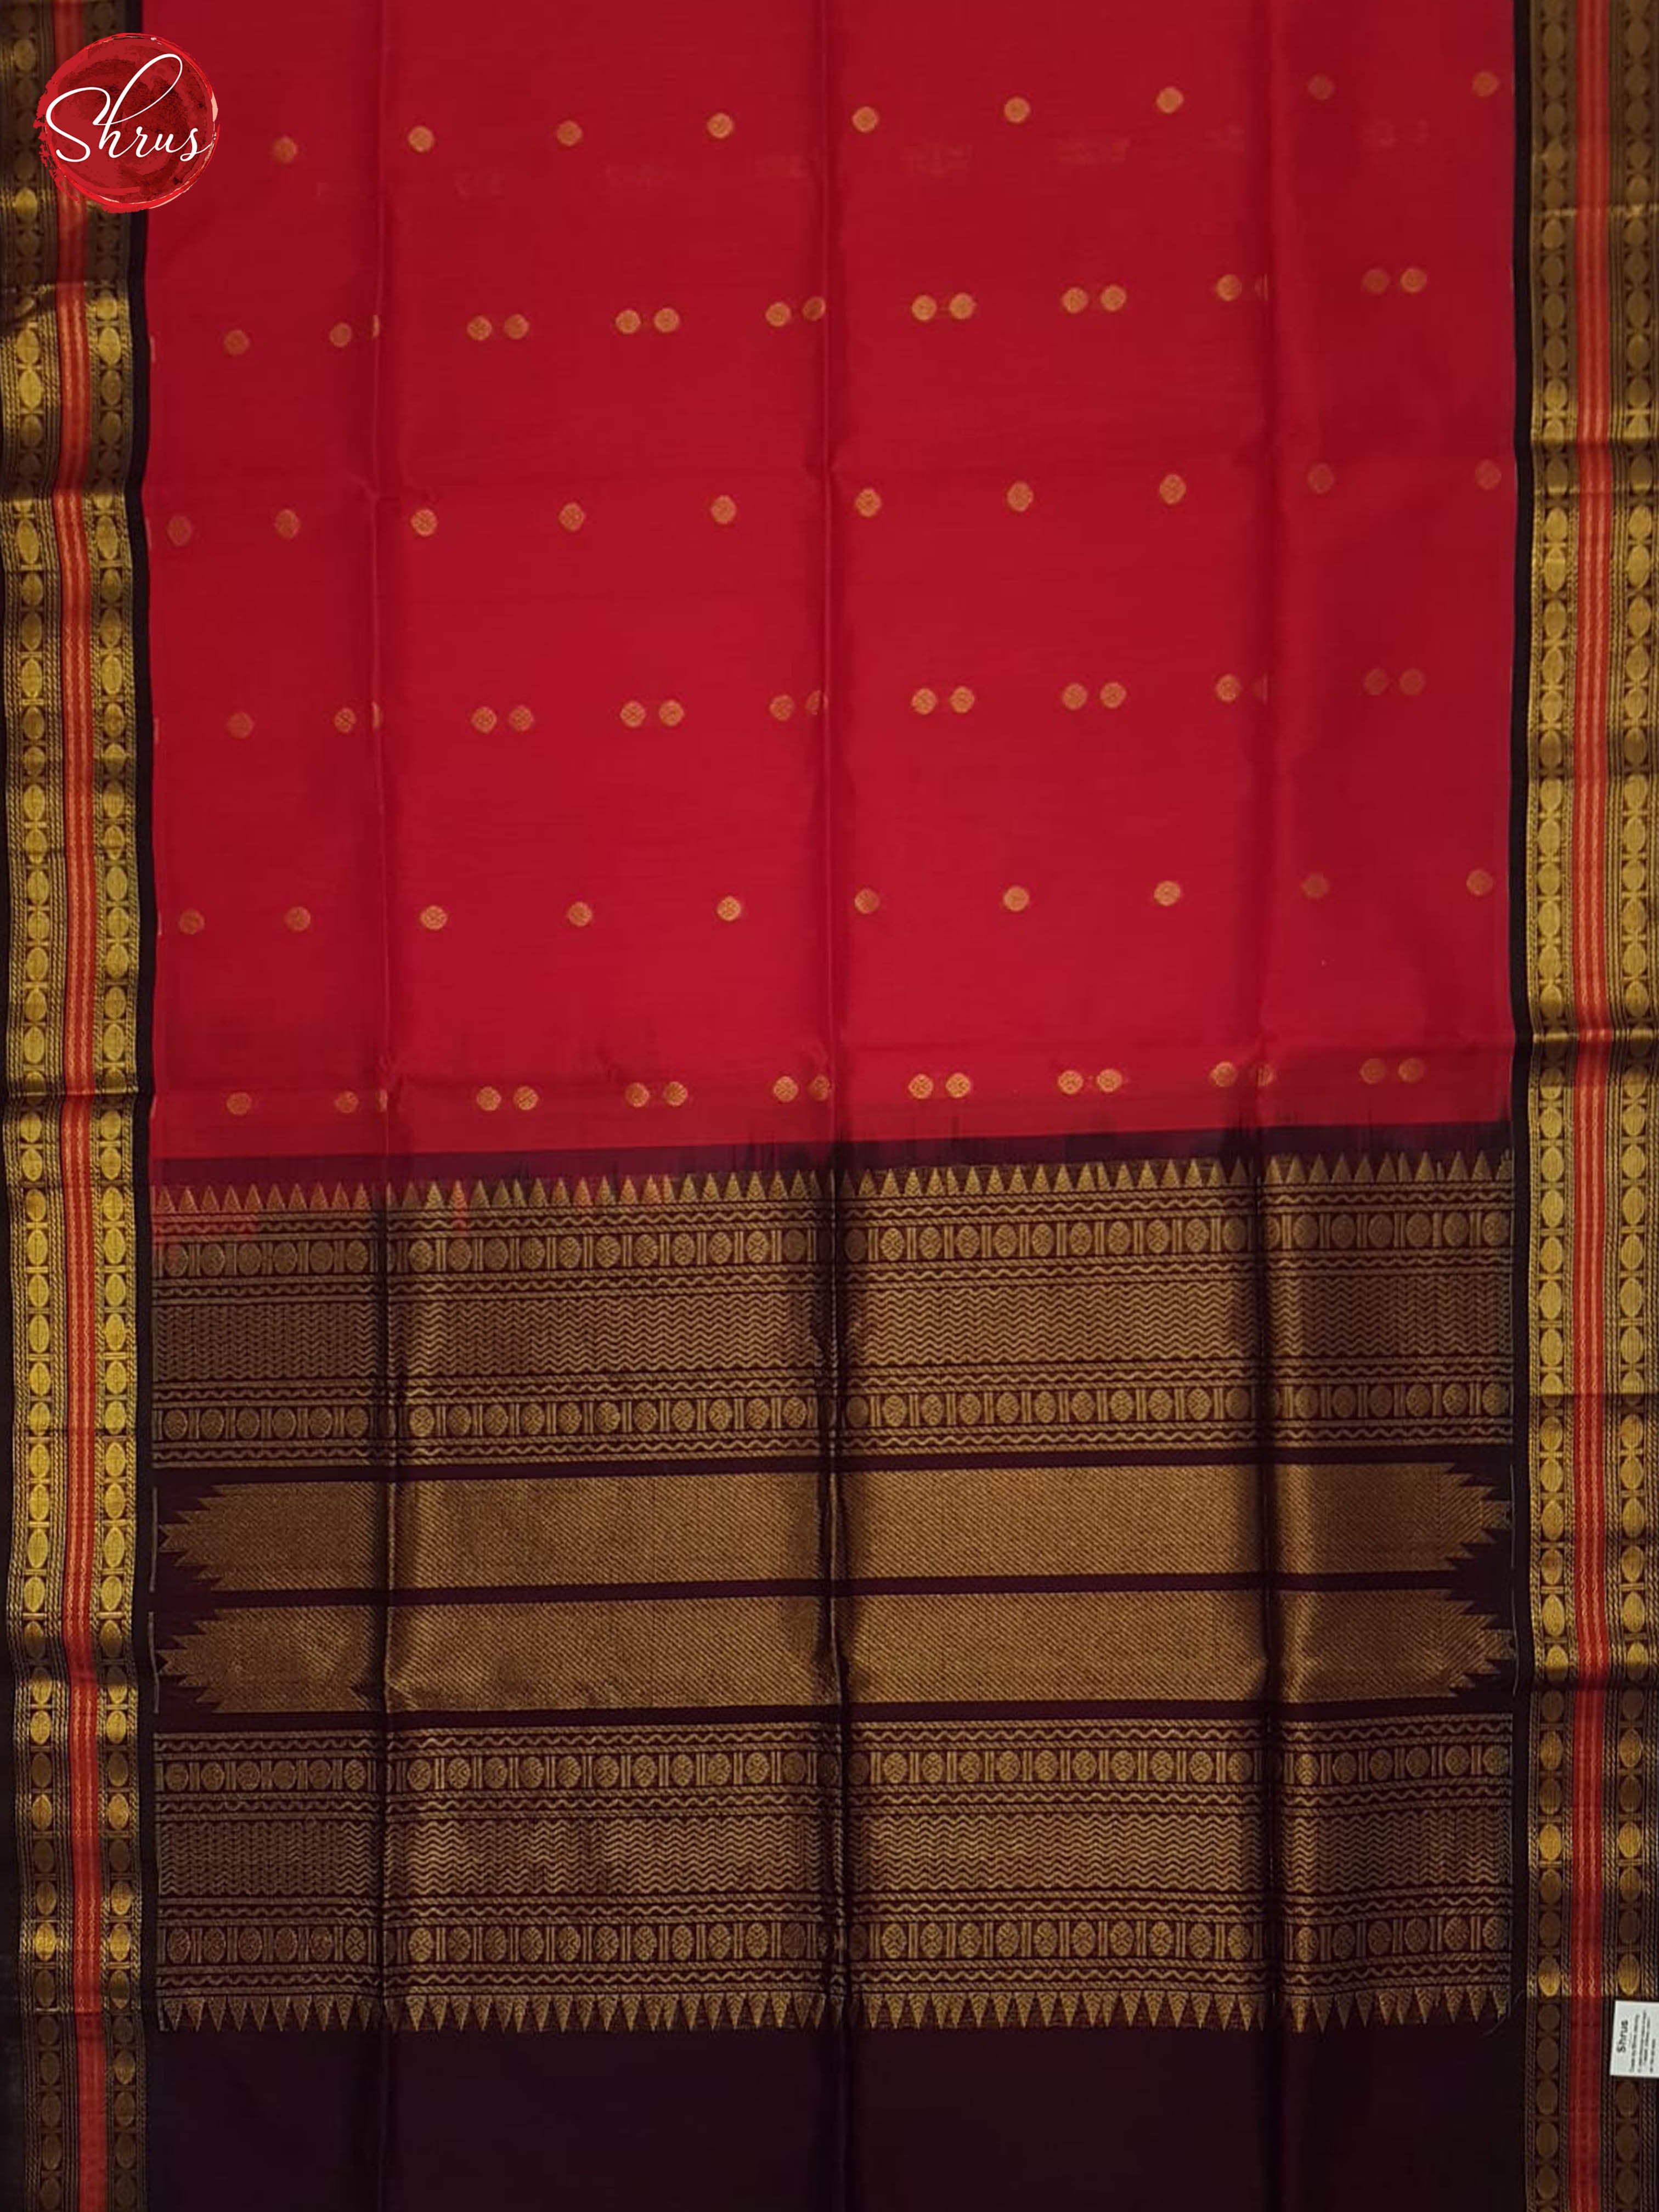 Red And Brown- Silk Cotton Saree - Shop on ShrusEternity.com